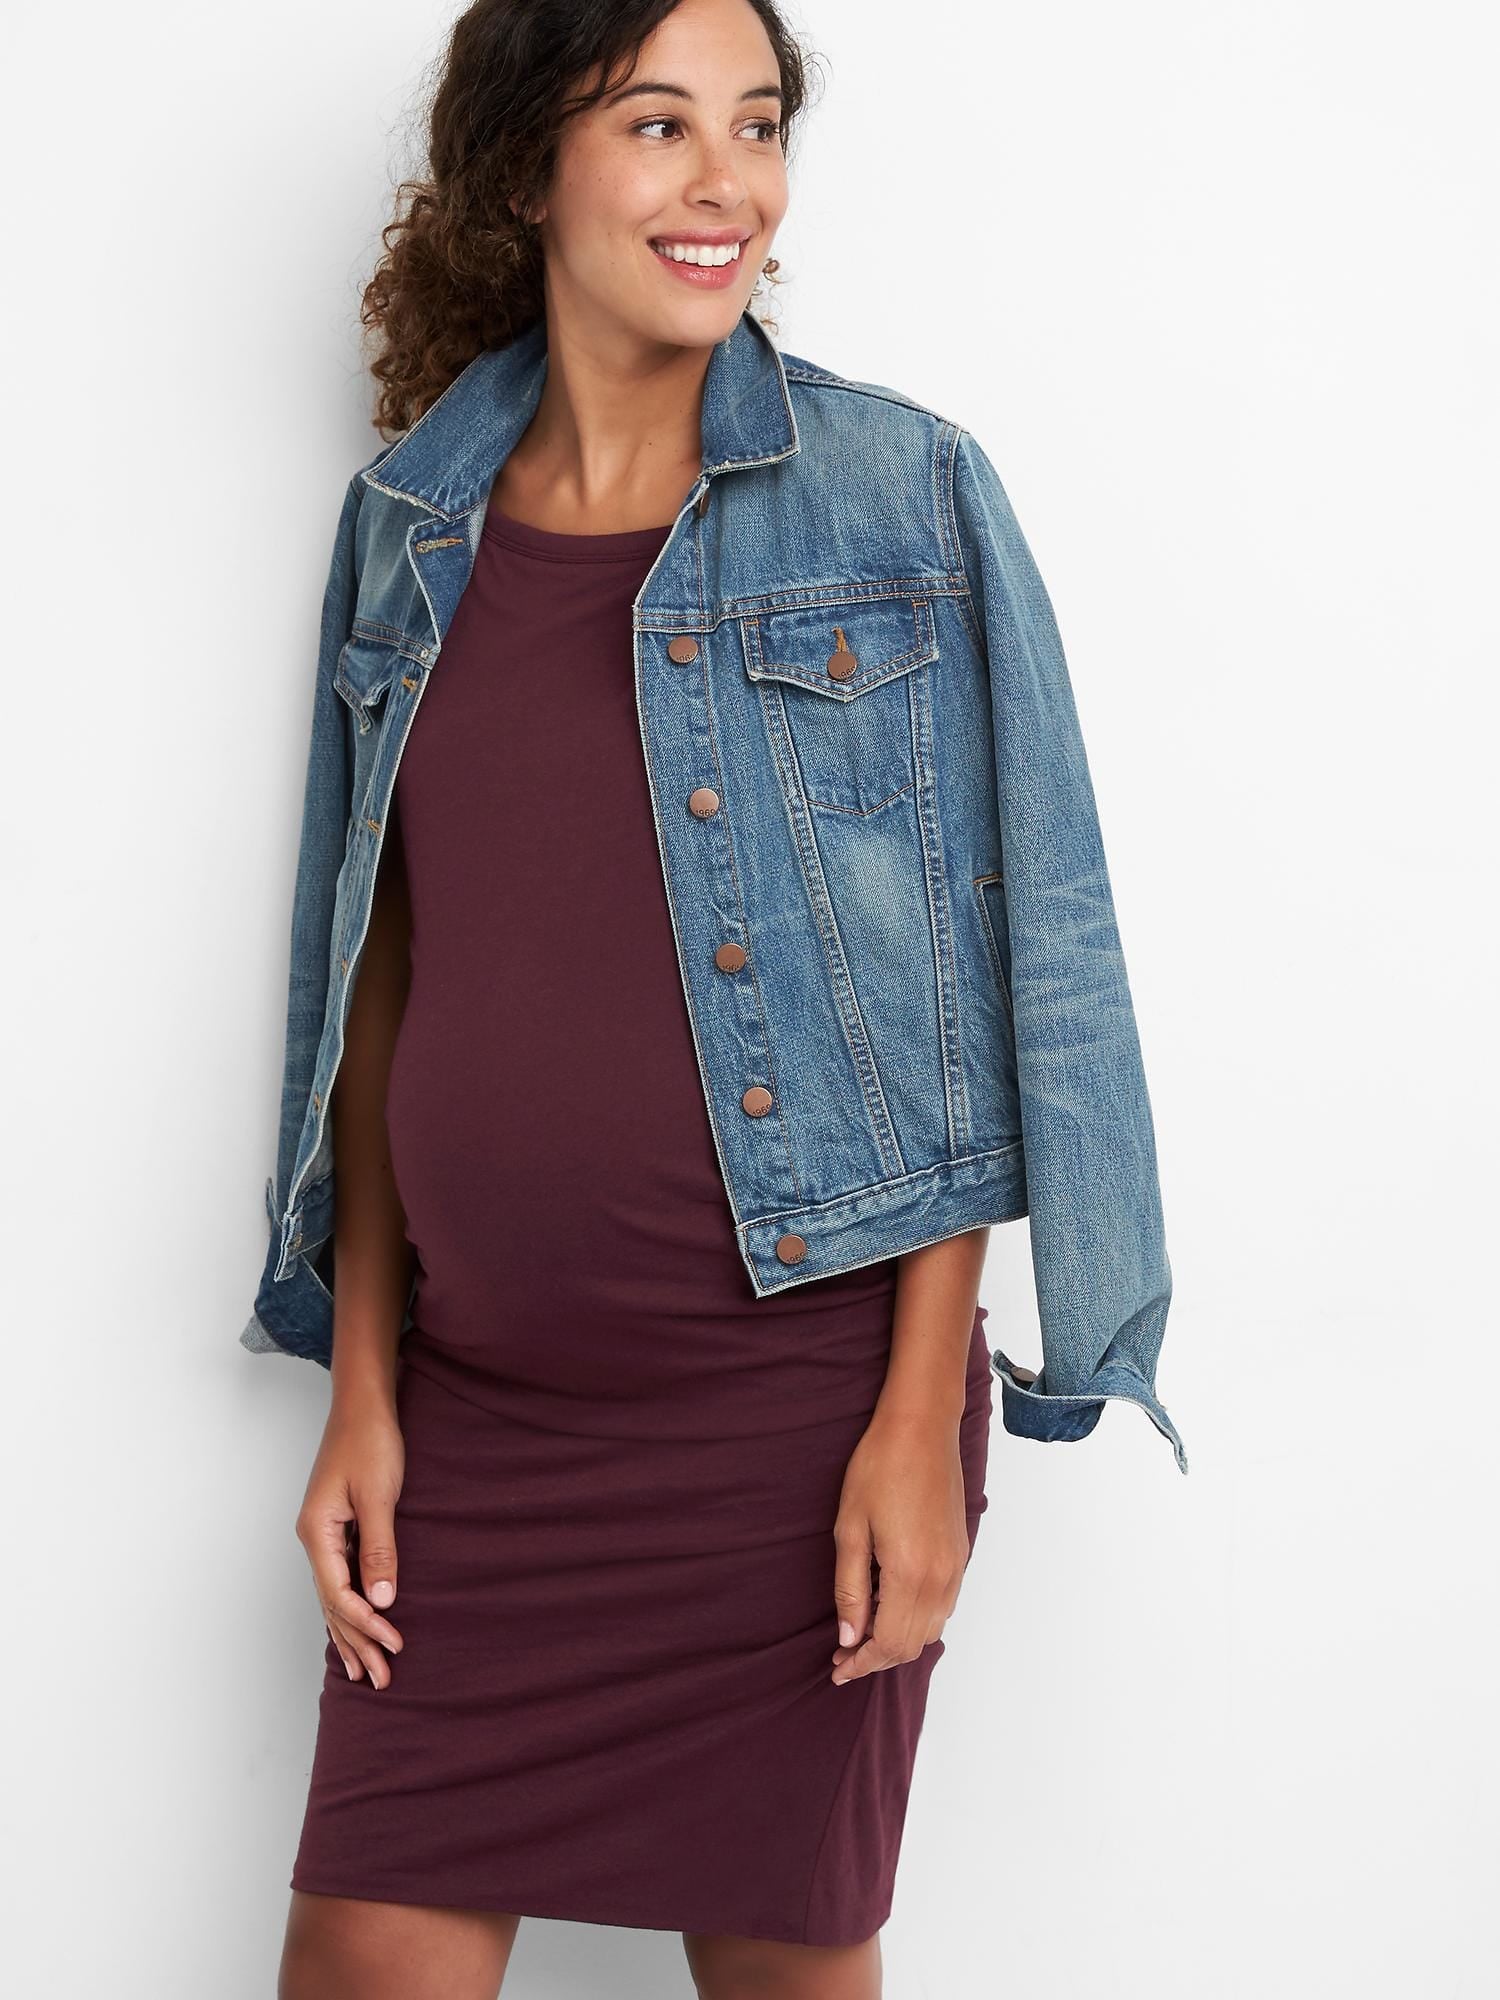 Gap Maternity Short-Sleeve T-Shirt Dress | 16 Fall Maternity For Expecting Moms (That Are Actually Cute) | POPSUGAR Family Photo 6